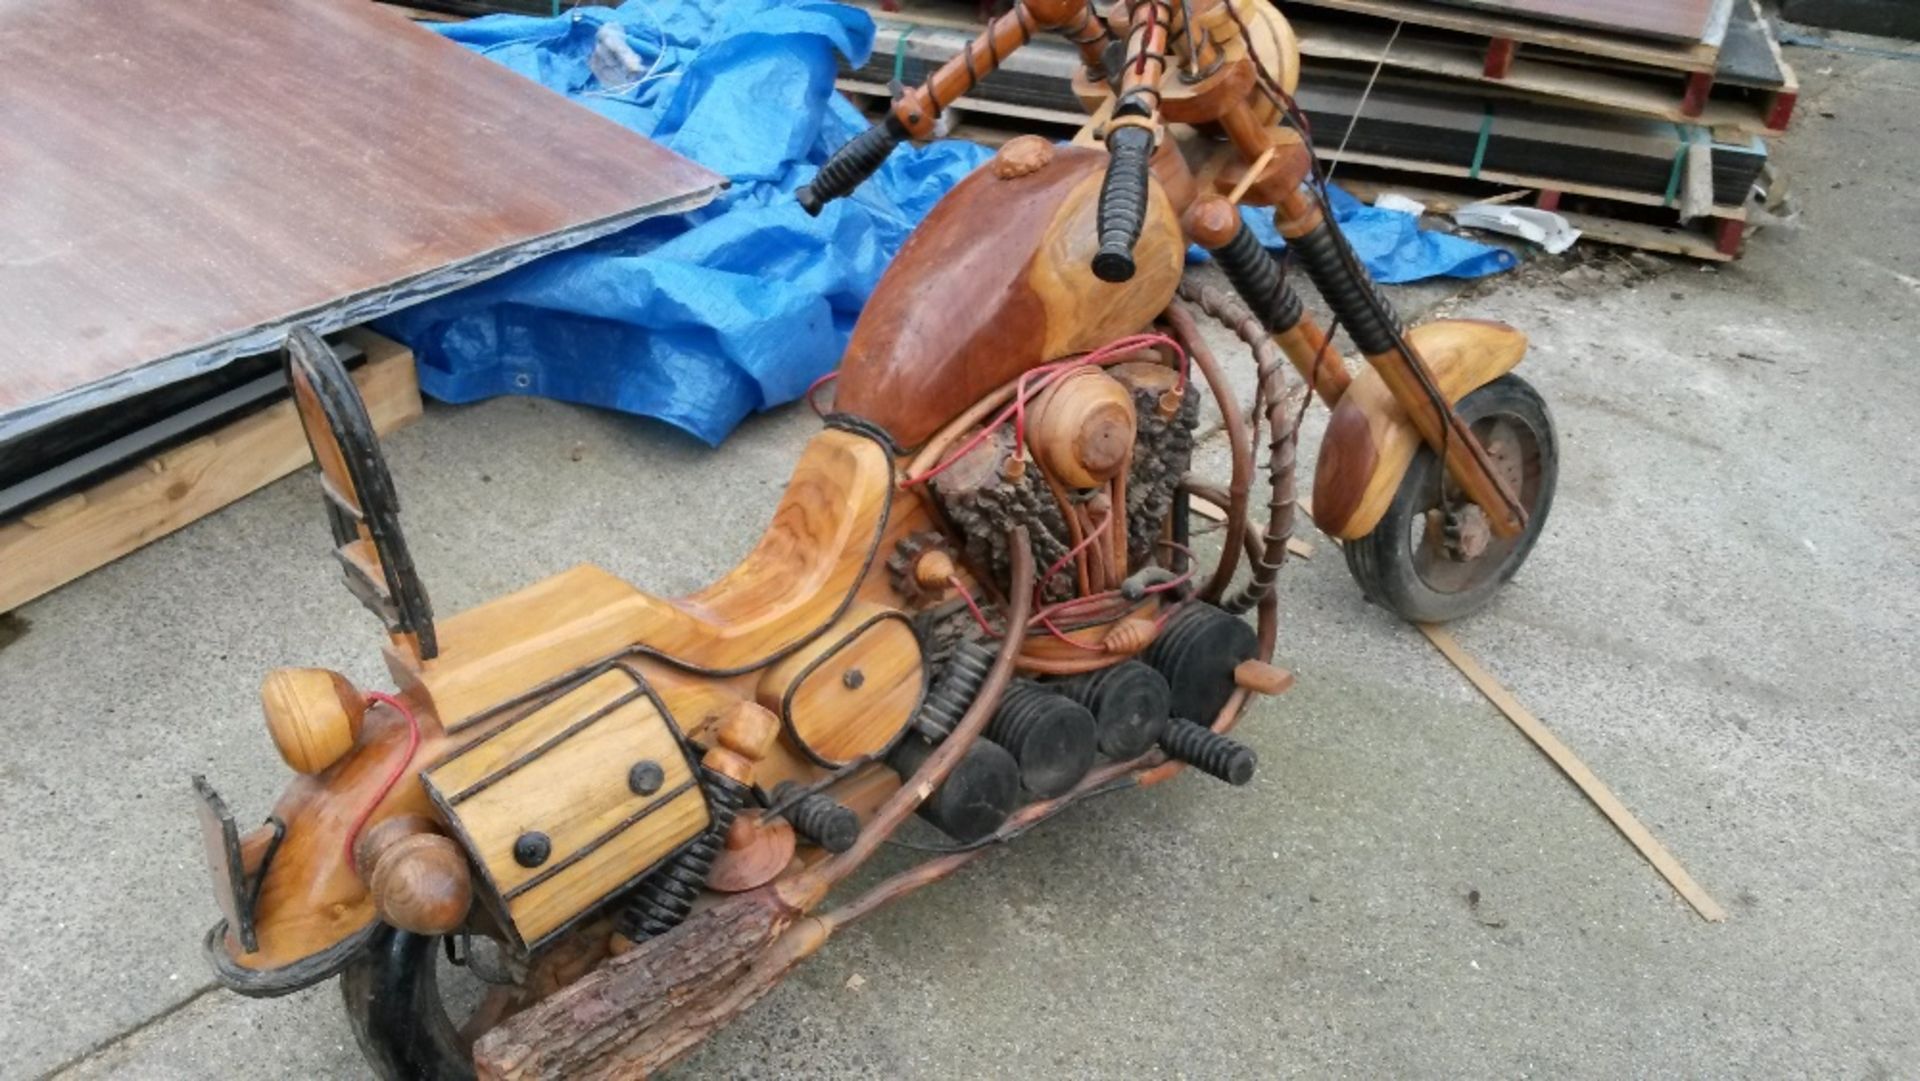 Replica piece - Wooden Harley Davidson was purchased 3 years ago for £3000, need a a little tlc, but